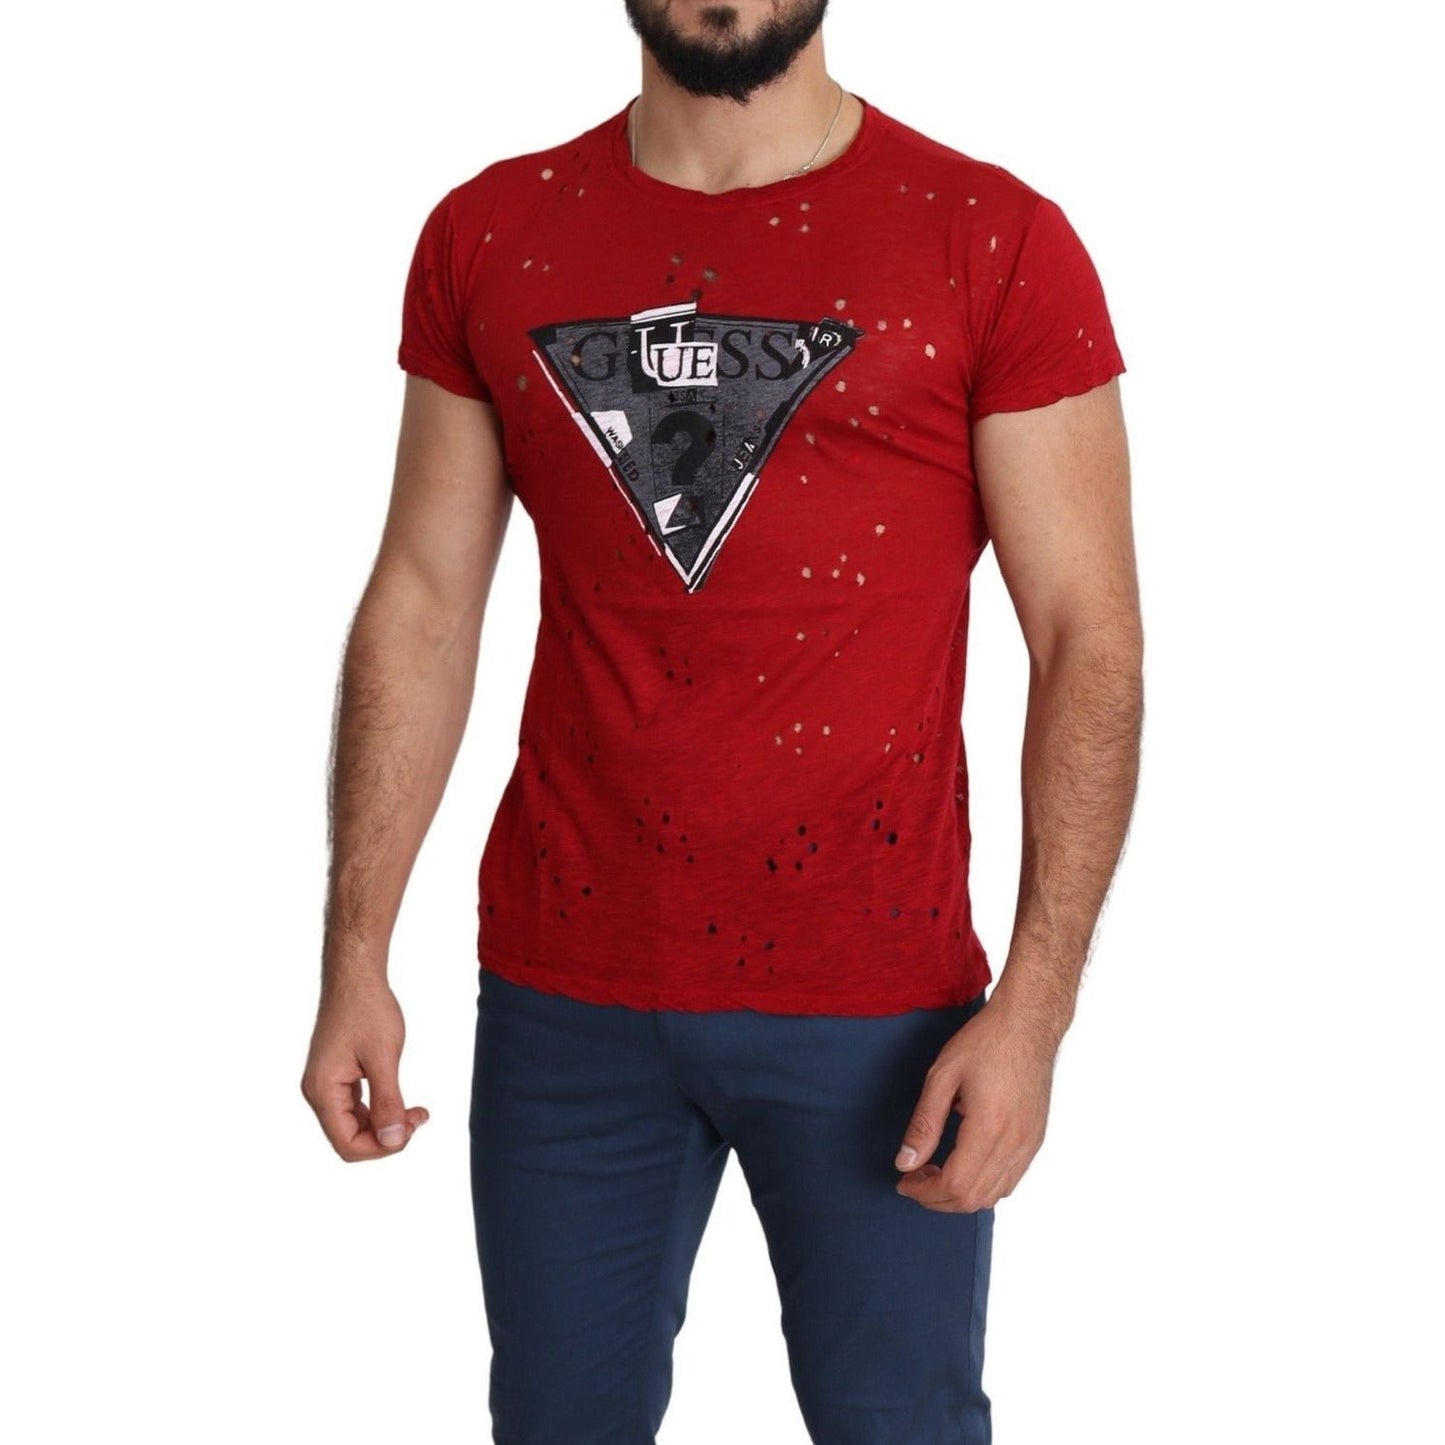 GuessRadiant Red Cotton Tee Perfect For Everyday StyleMcRichard Designer Brands£69.00